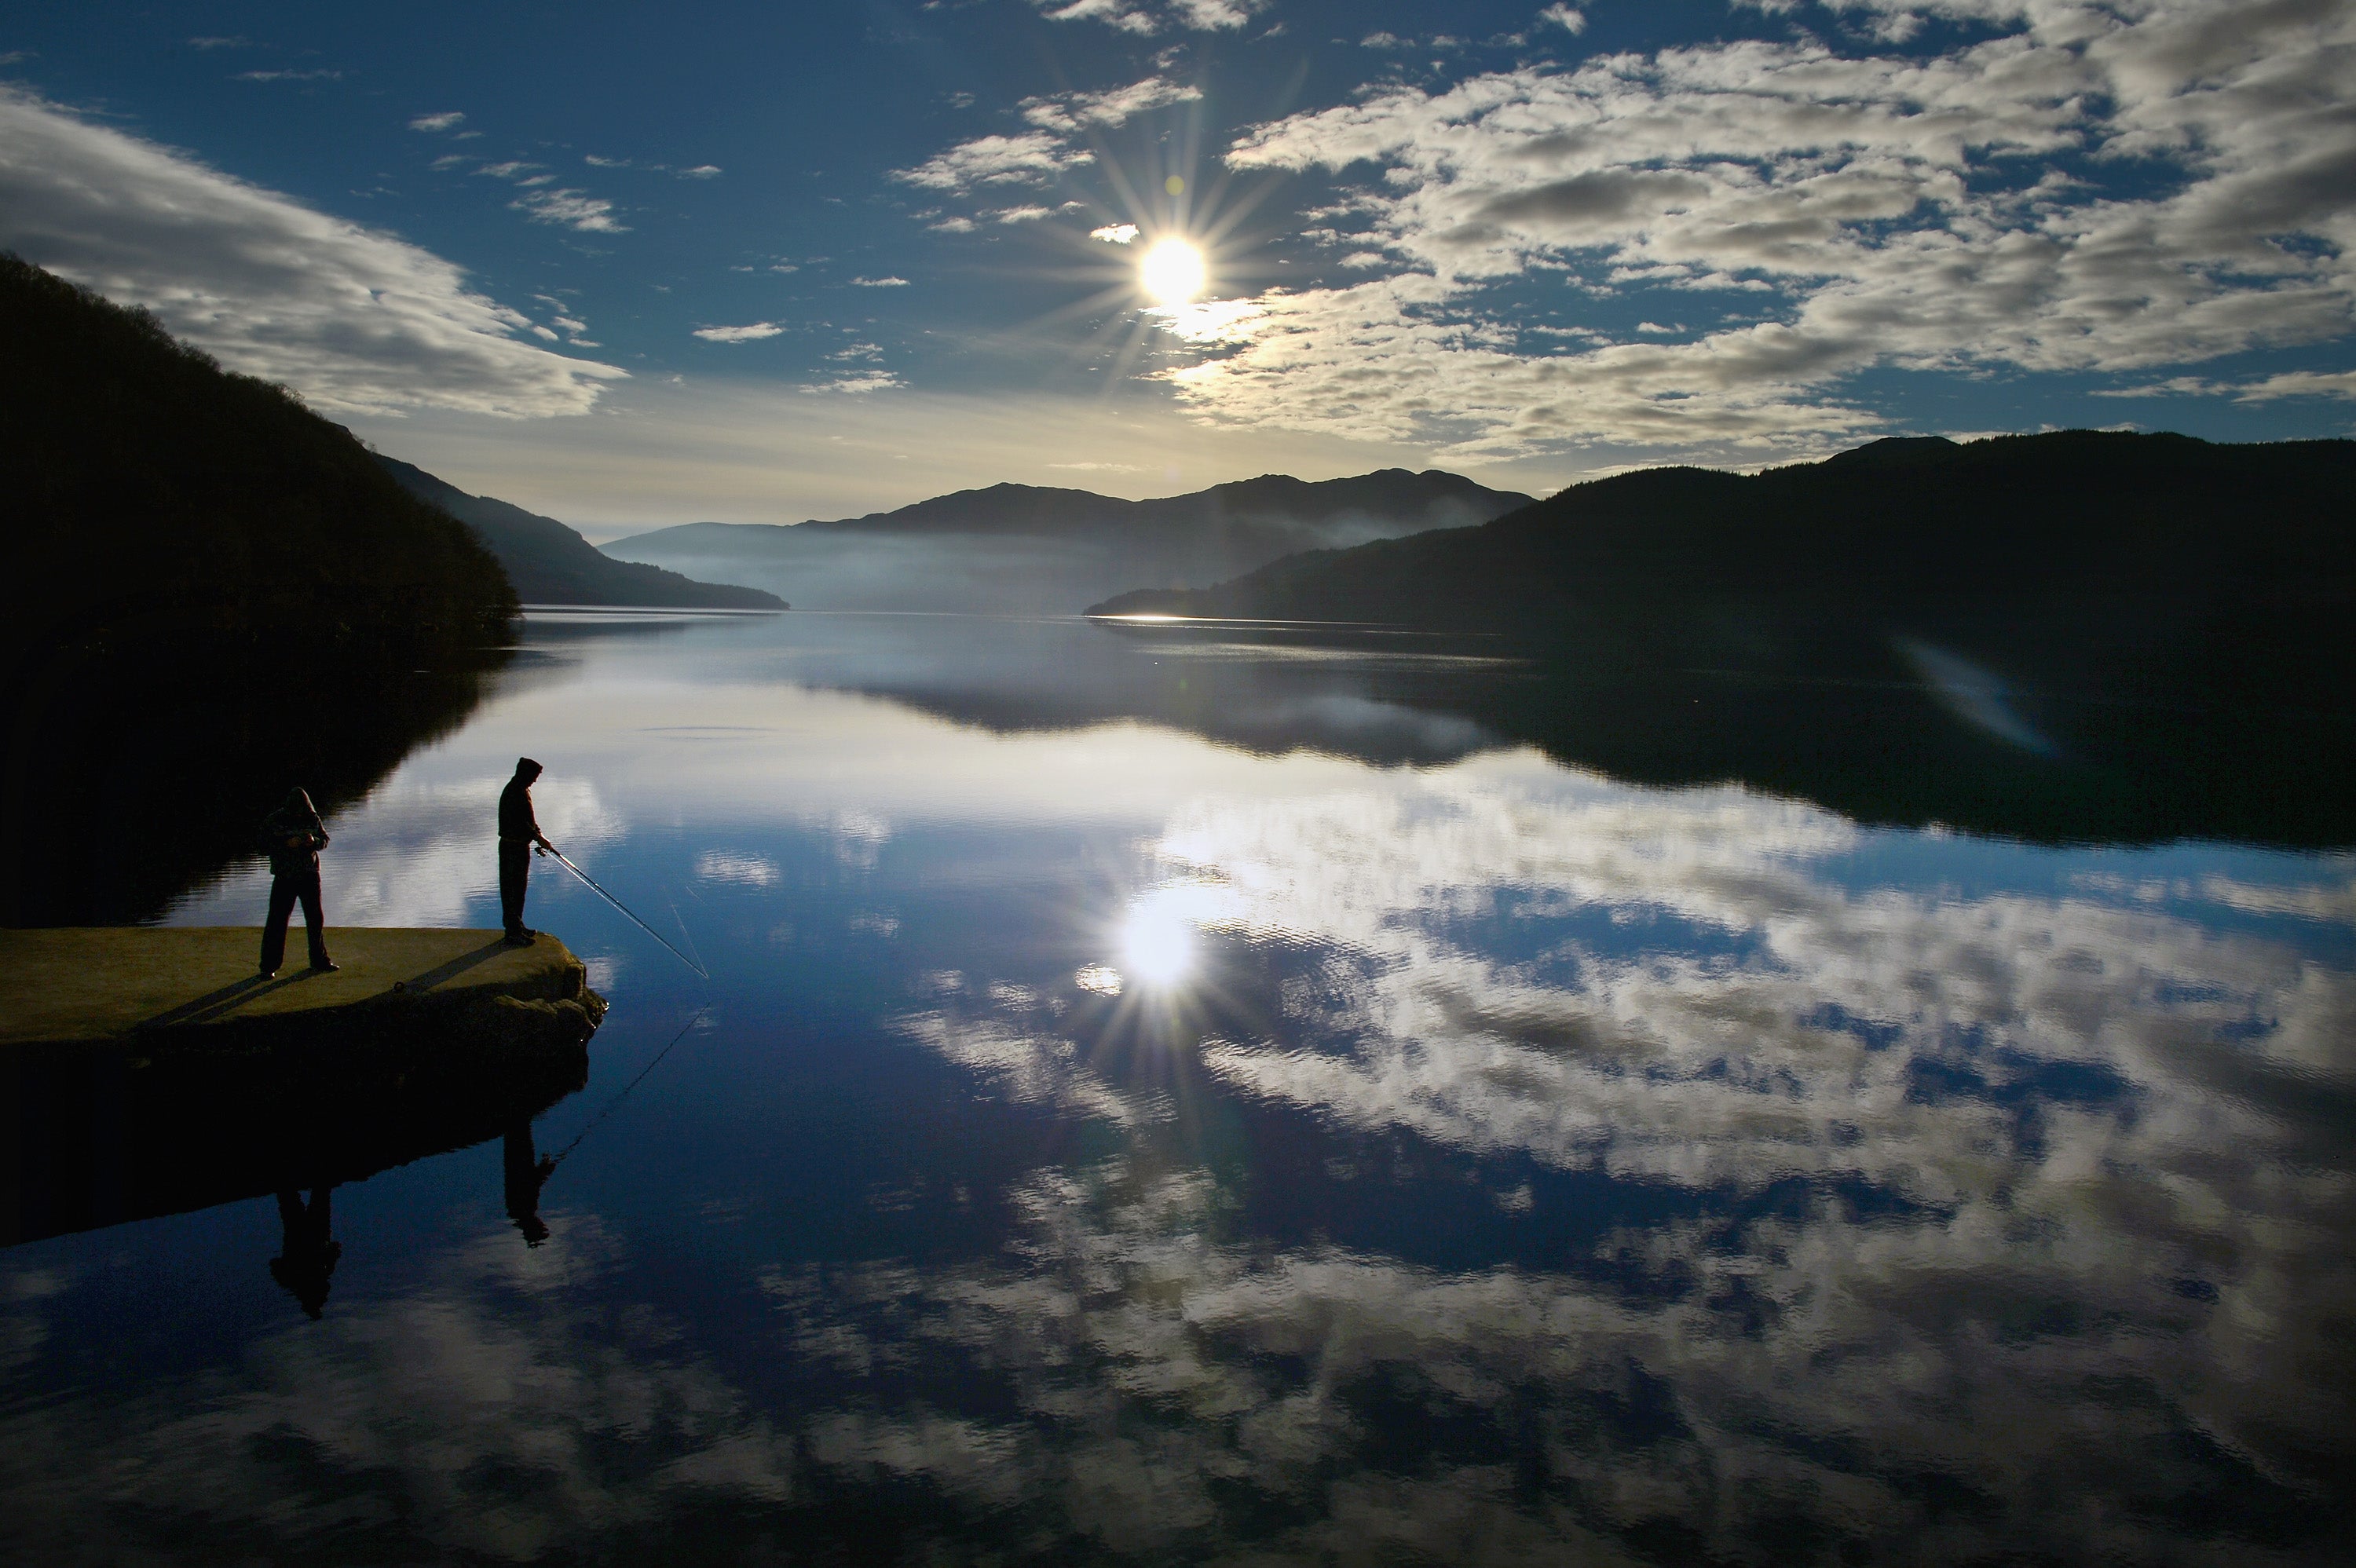 People fish from Inversnaid Pier in Loch Lomond, Scotland (stock image)